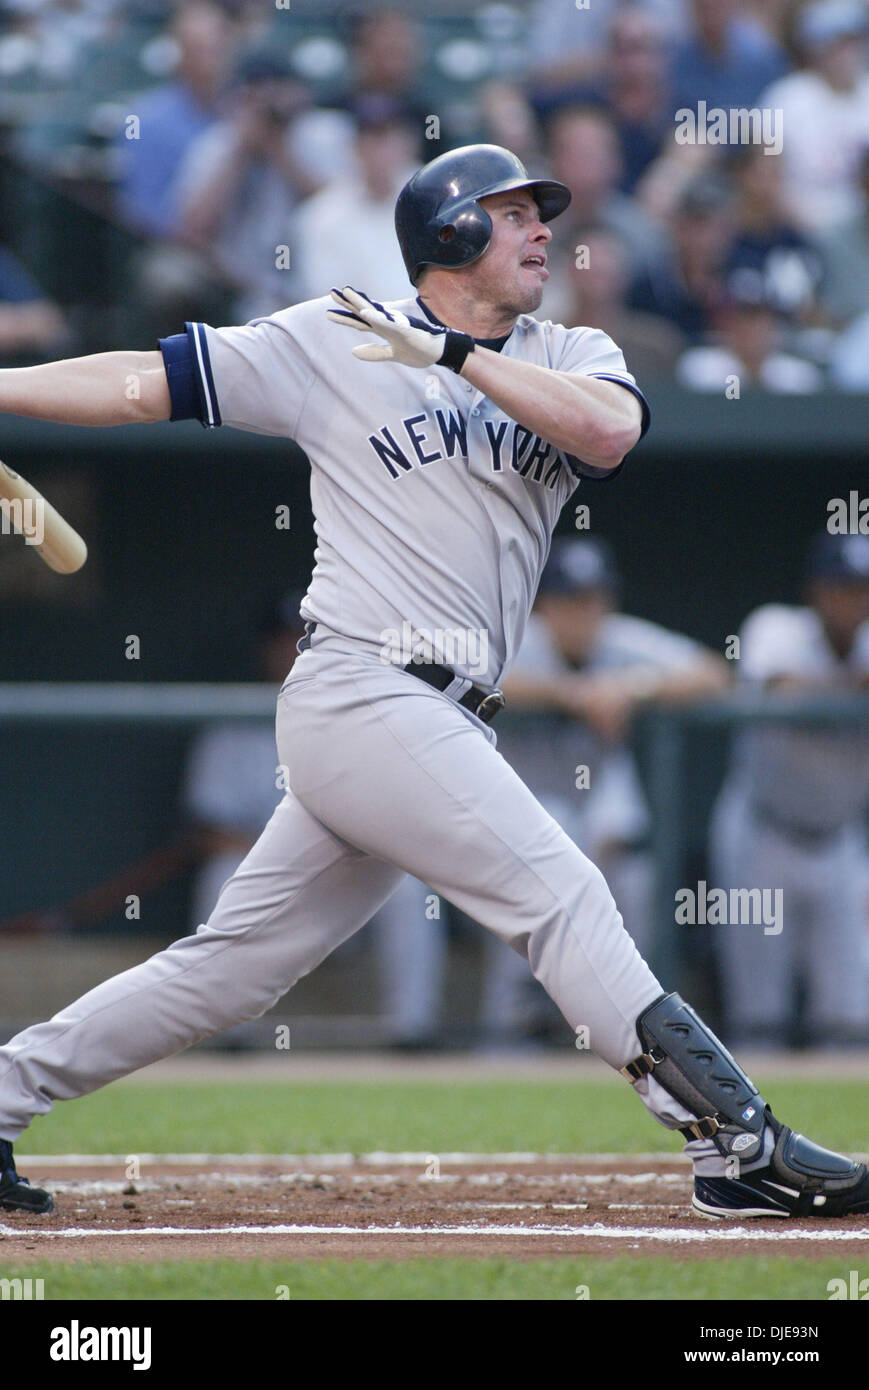 Jun 22, 2004; Baltimore, MD, USA; Yankees' JASON GIAMBI watches a fly ball  out in the 1st inning during the New York Yankees v. Baltimore Orioles  baseball game, Tuesday June 22, 2004